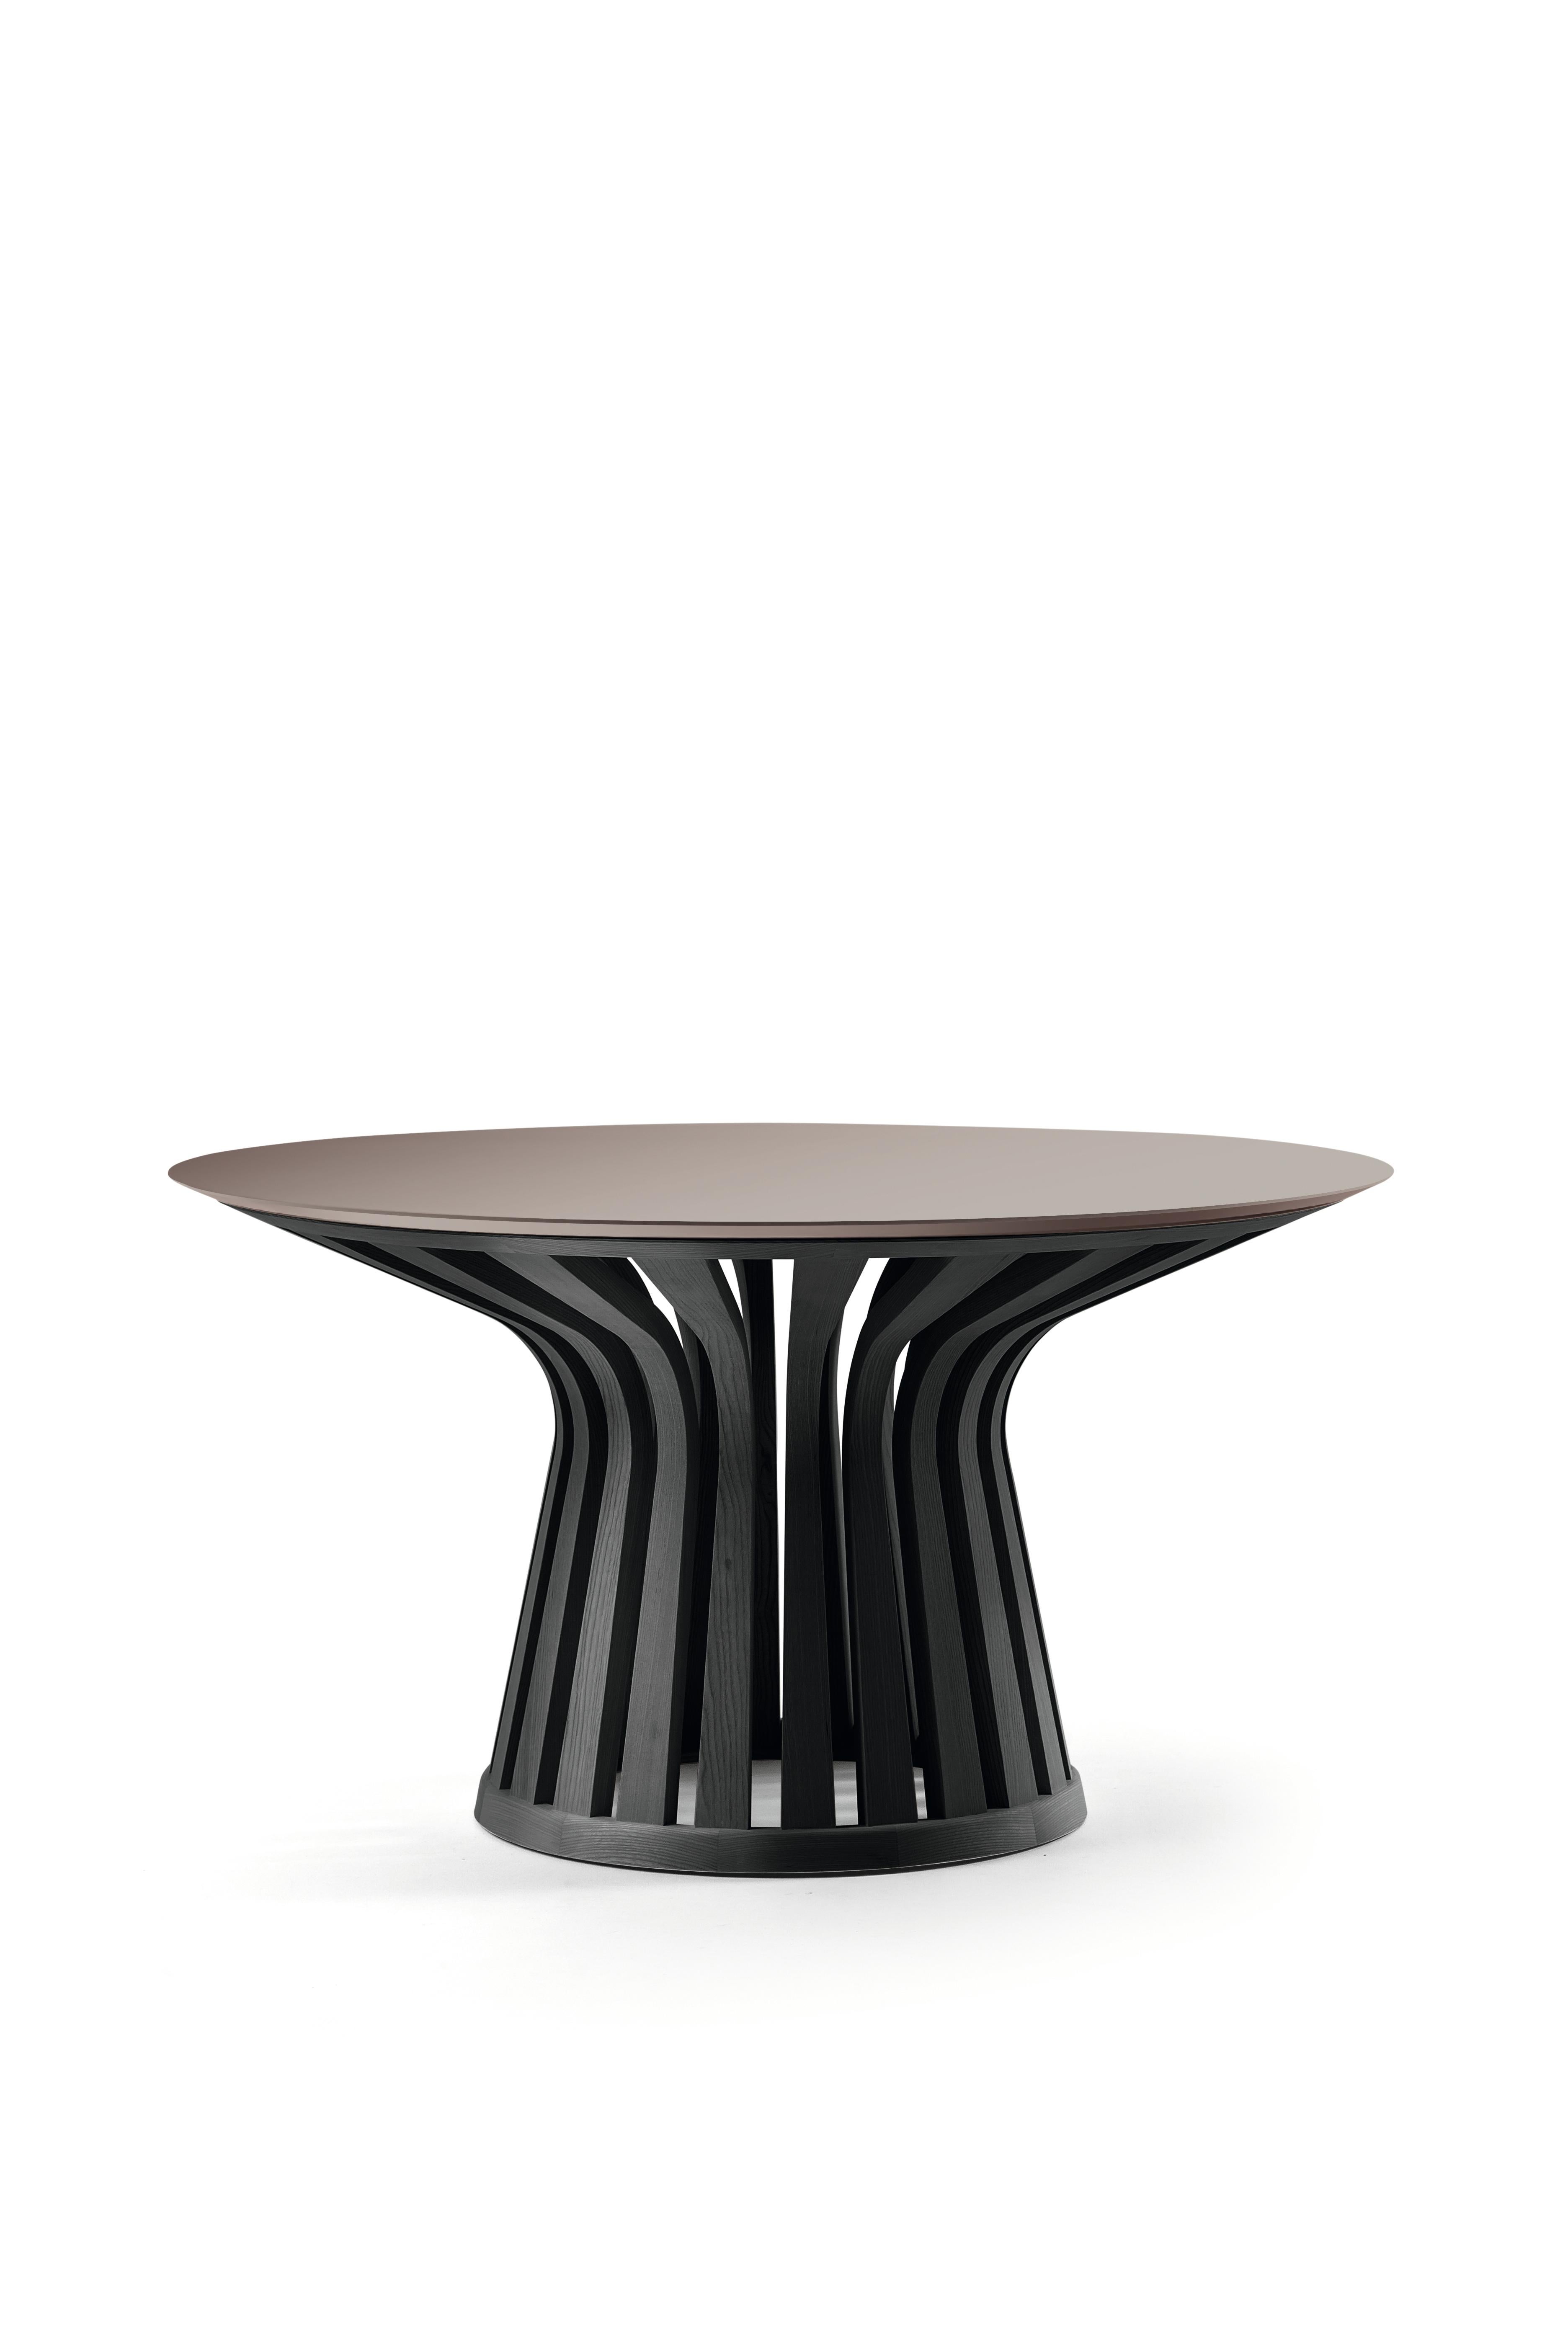 Lebeau Wood Table by Patrick Jouin  For Sale 5